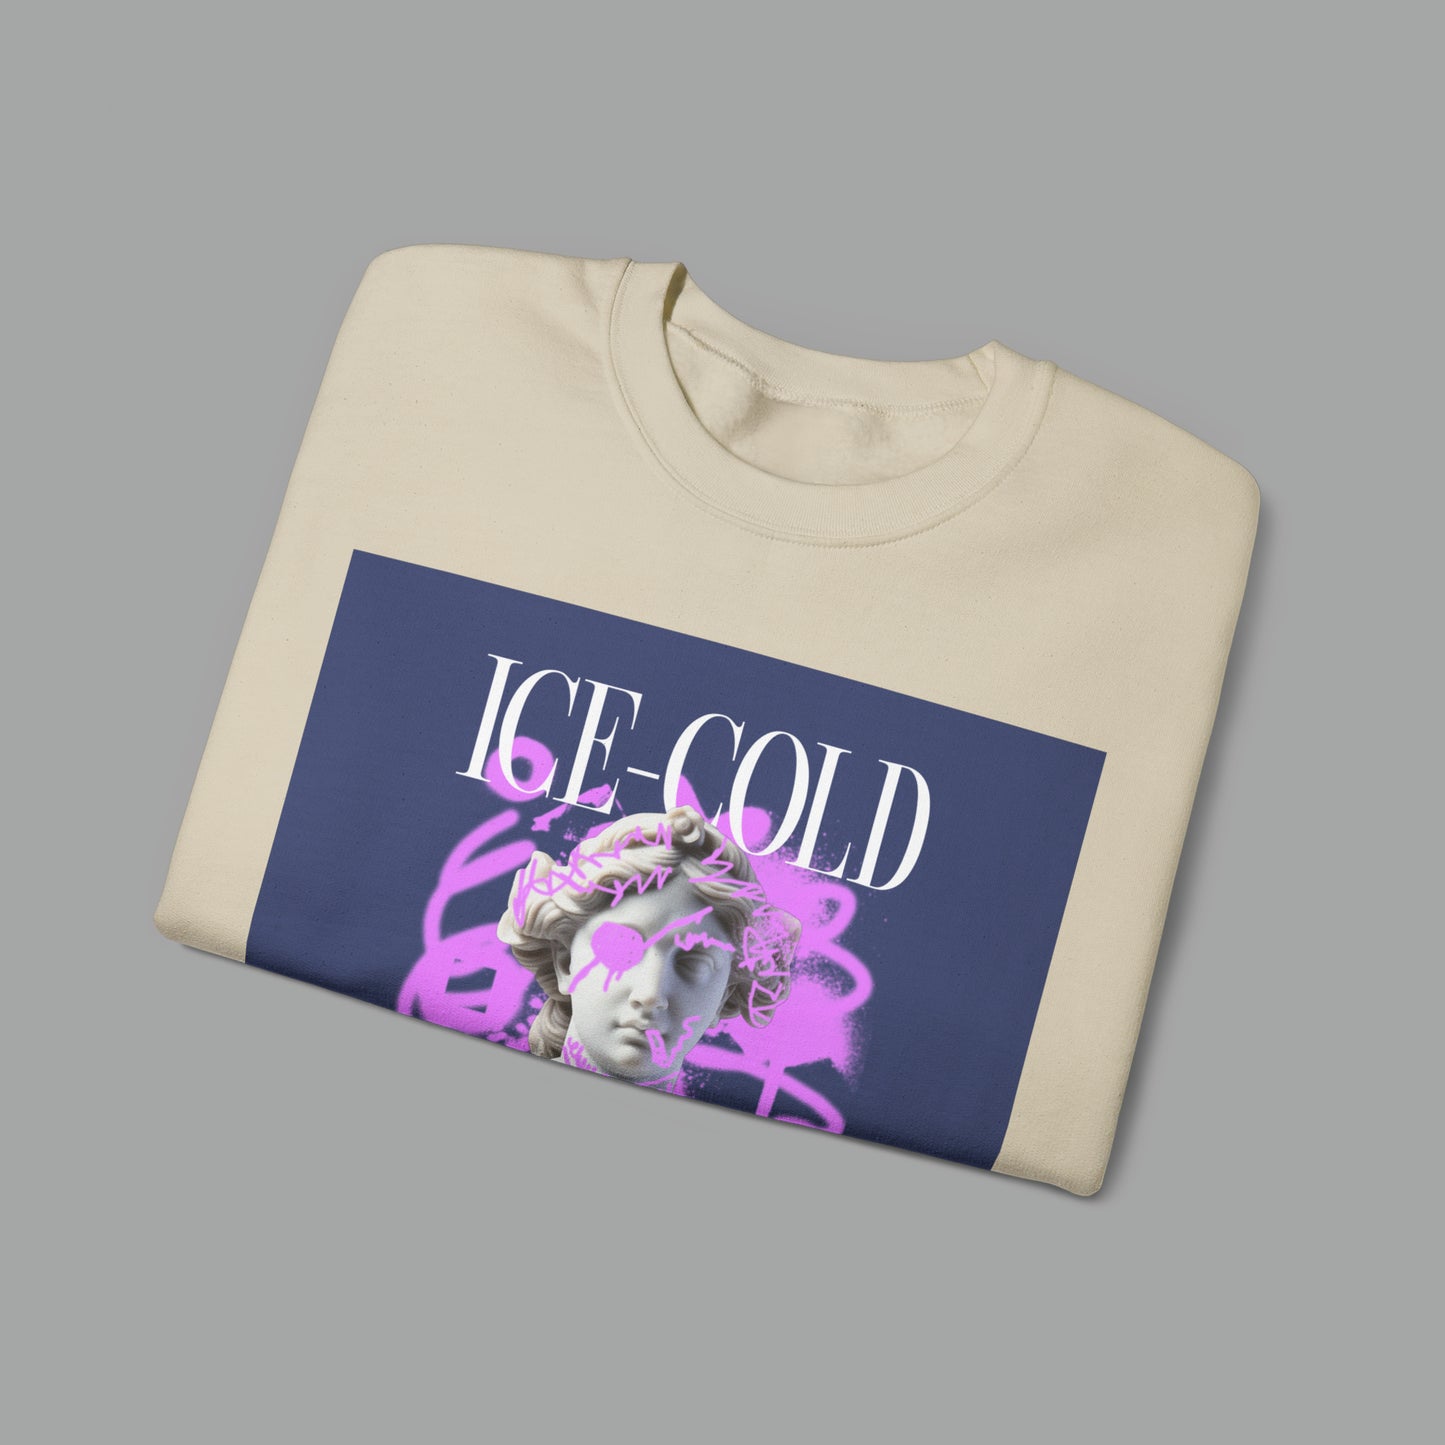 ICE COLD HEART Pullover